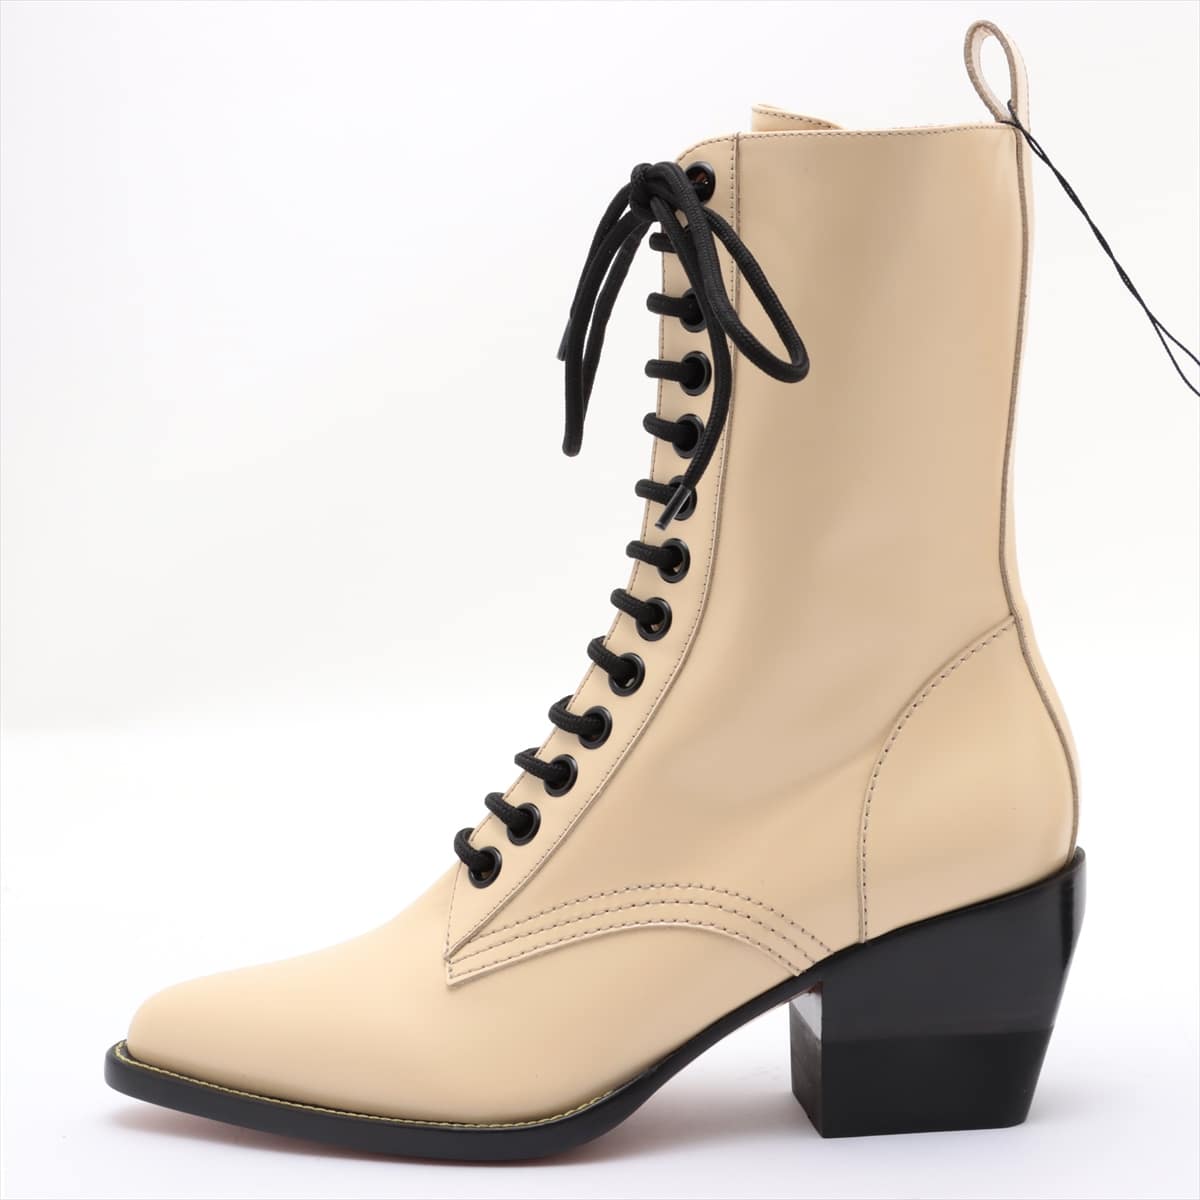 Chloe Leather Boots 39 Ladies' Yellow gold